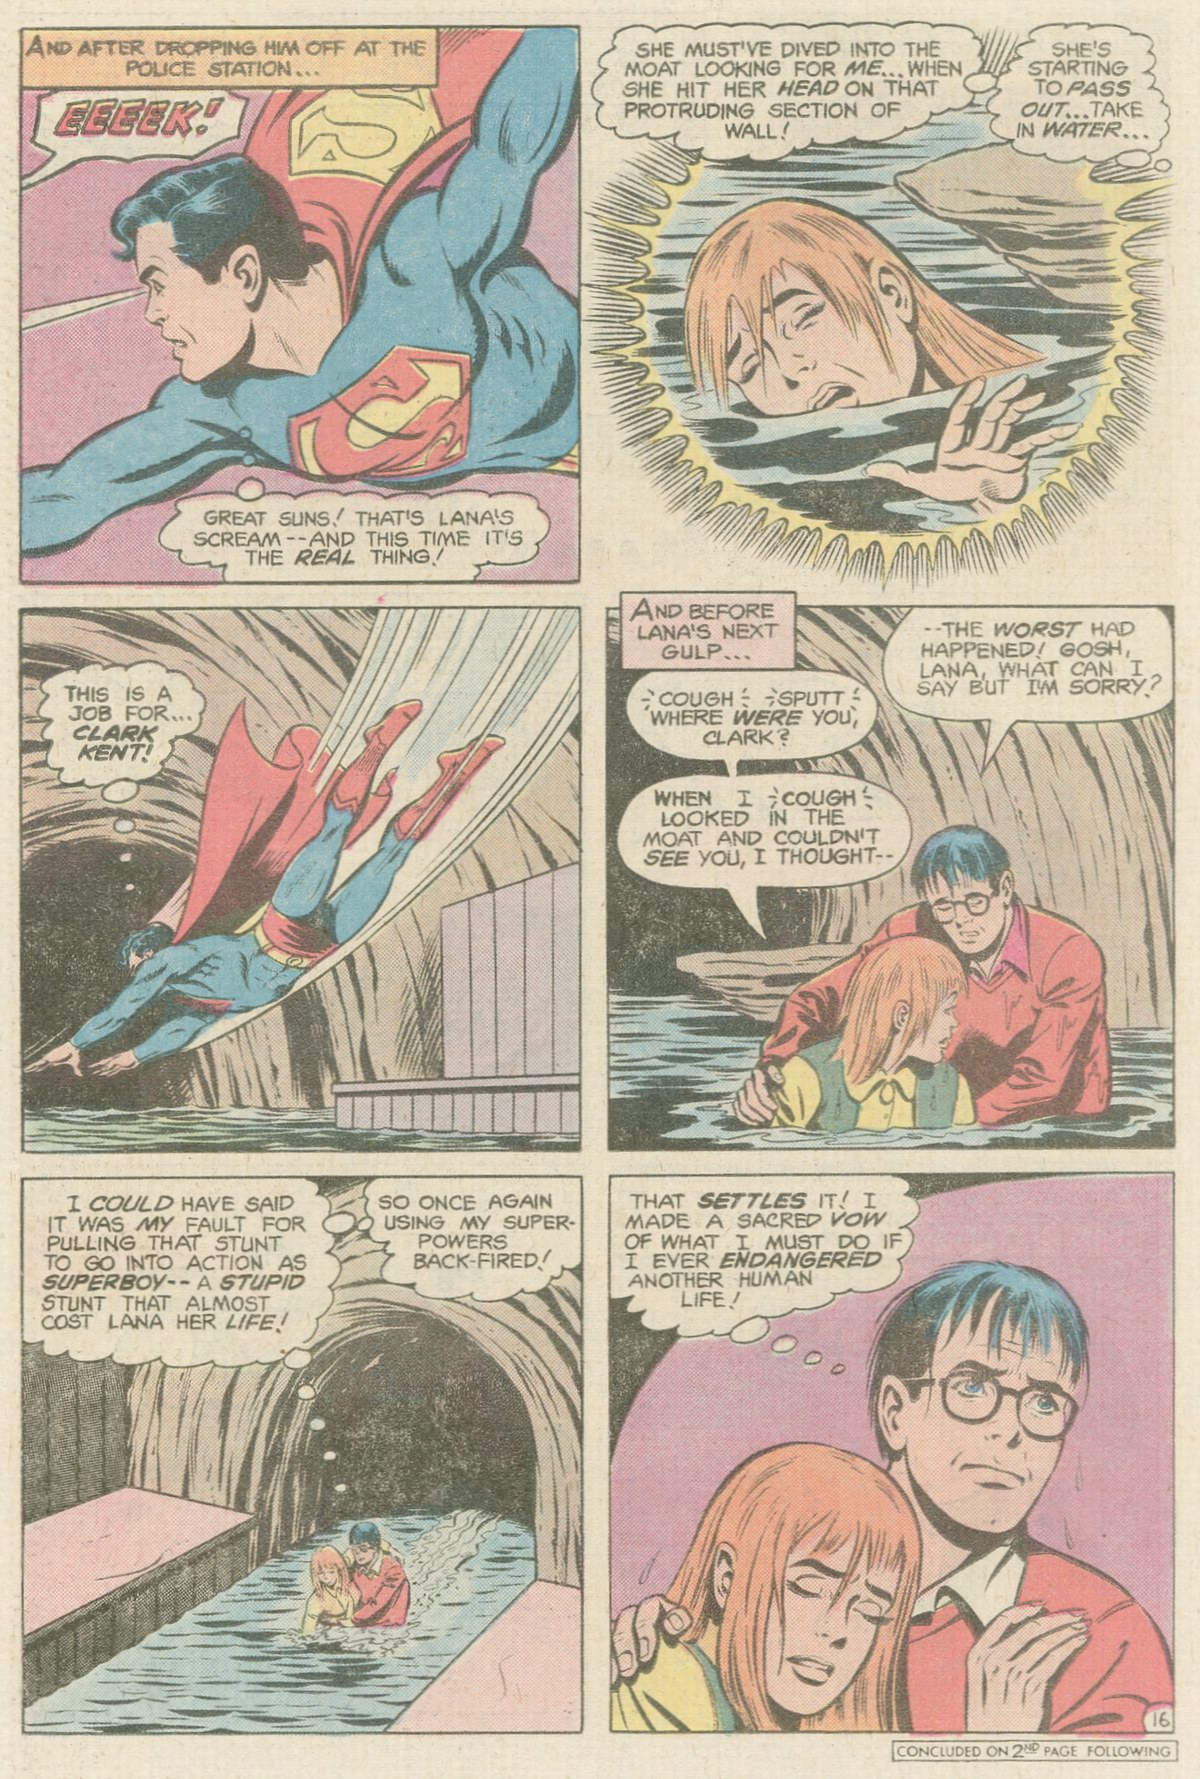 The New Adventures of Superboy 22 Page 19